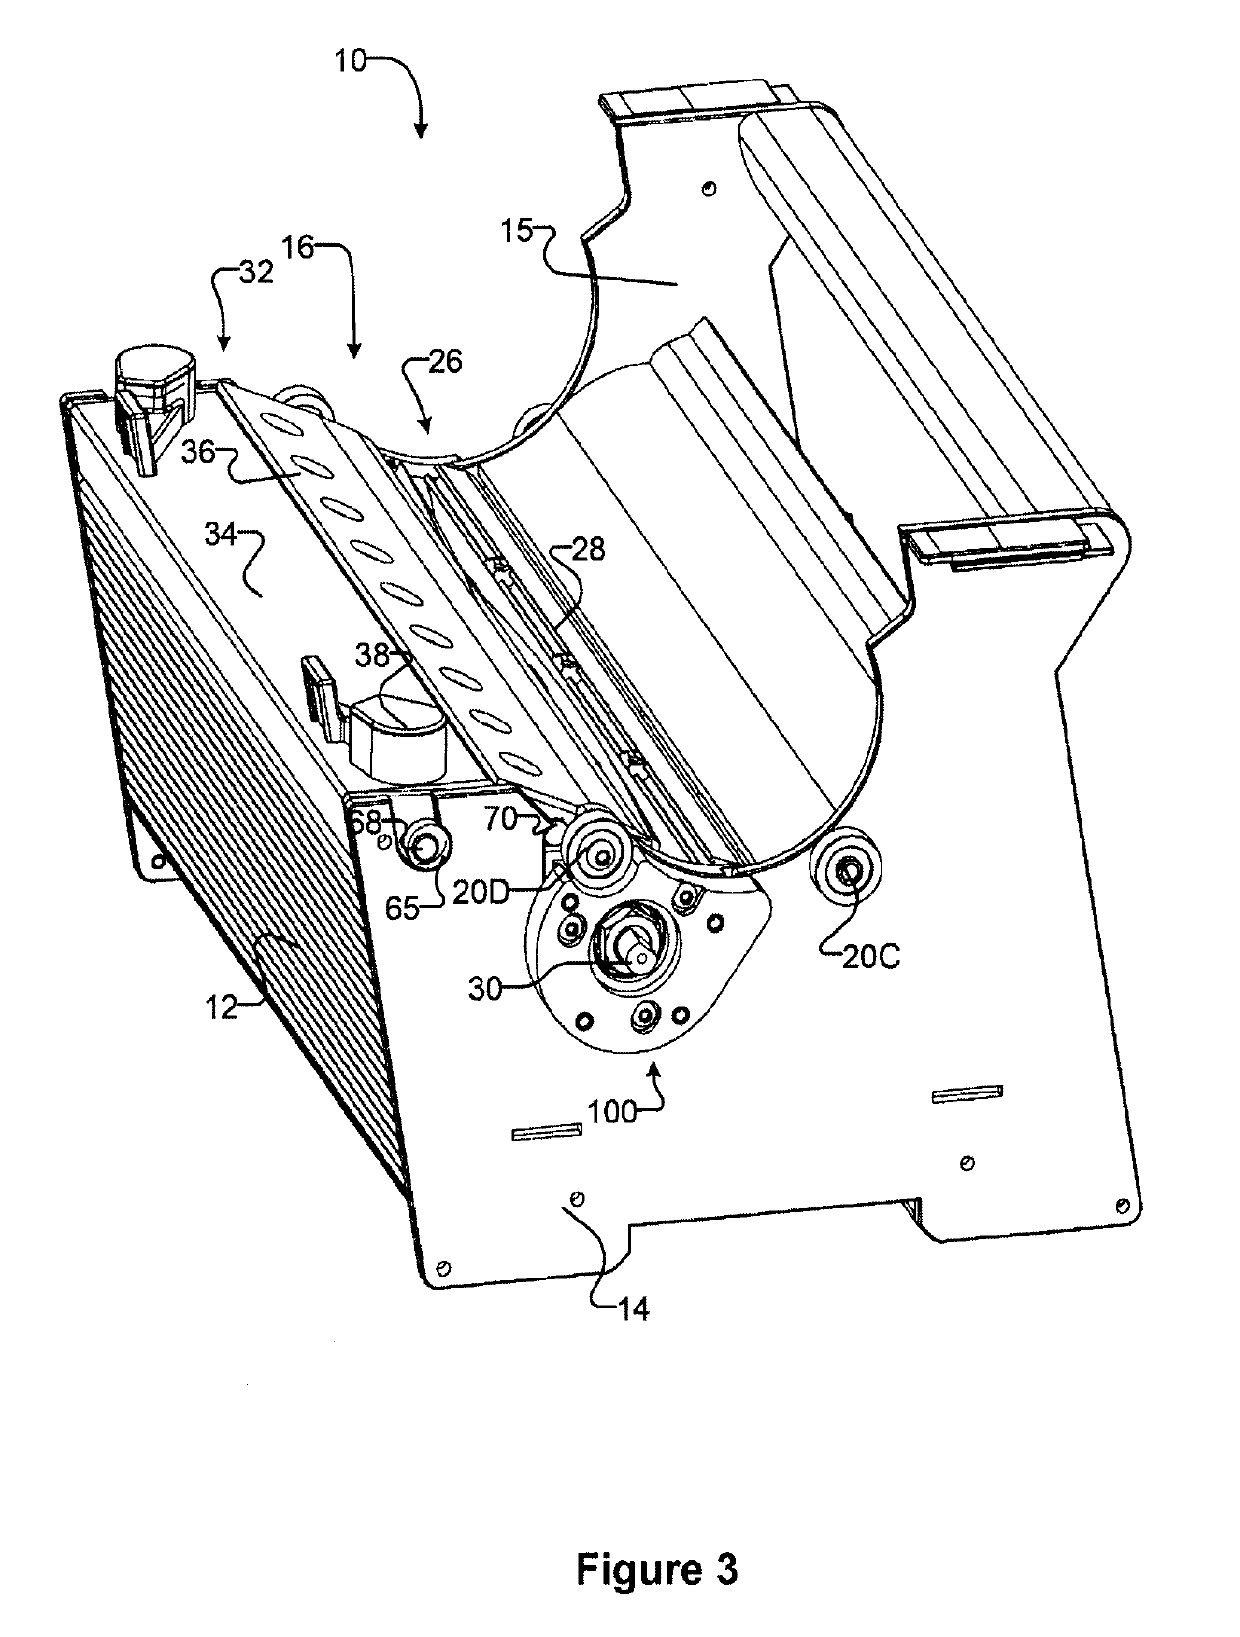 Bearing block assembly for a plant trimming machine